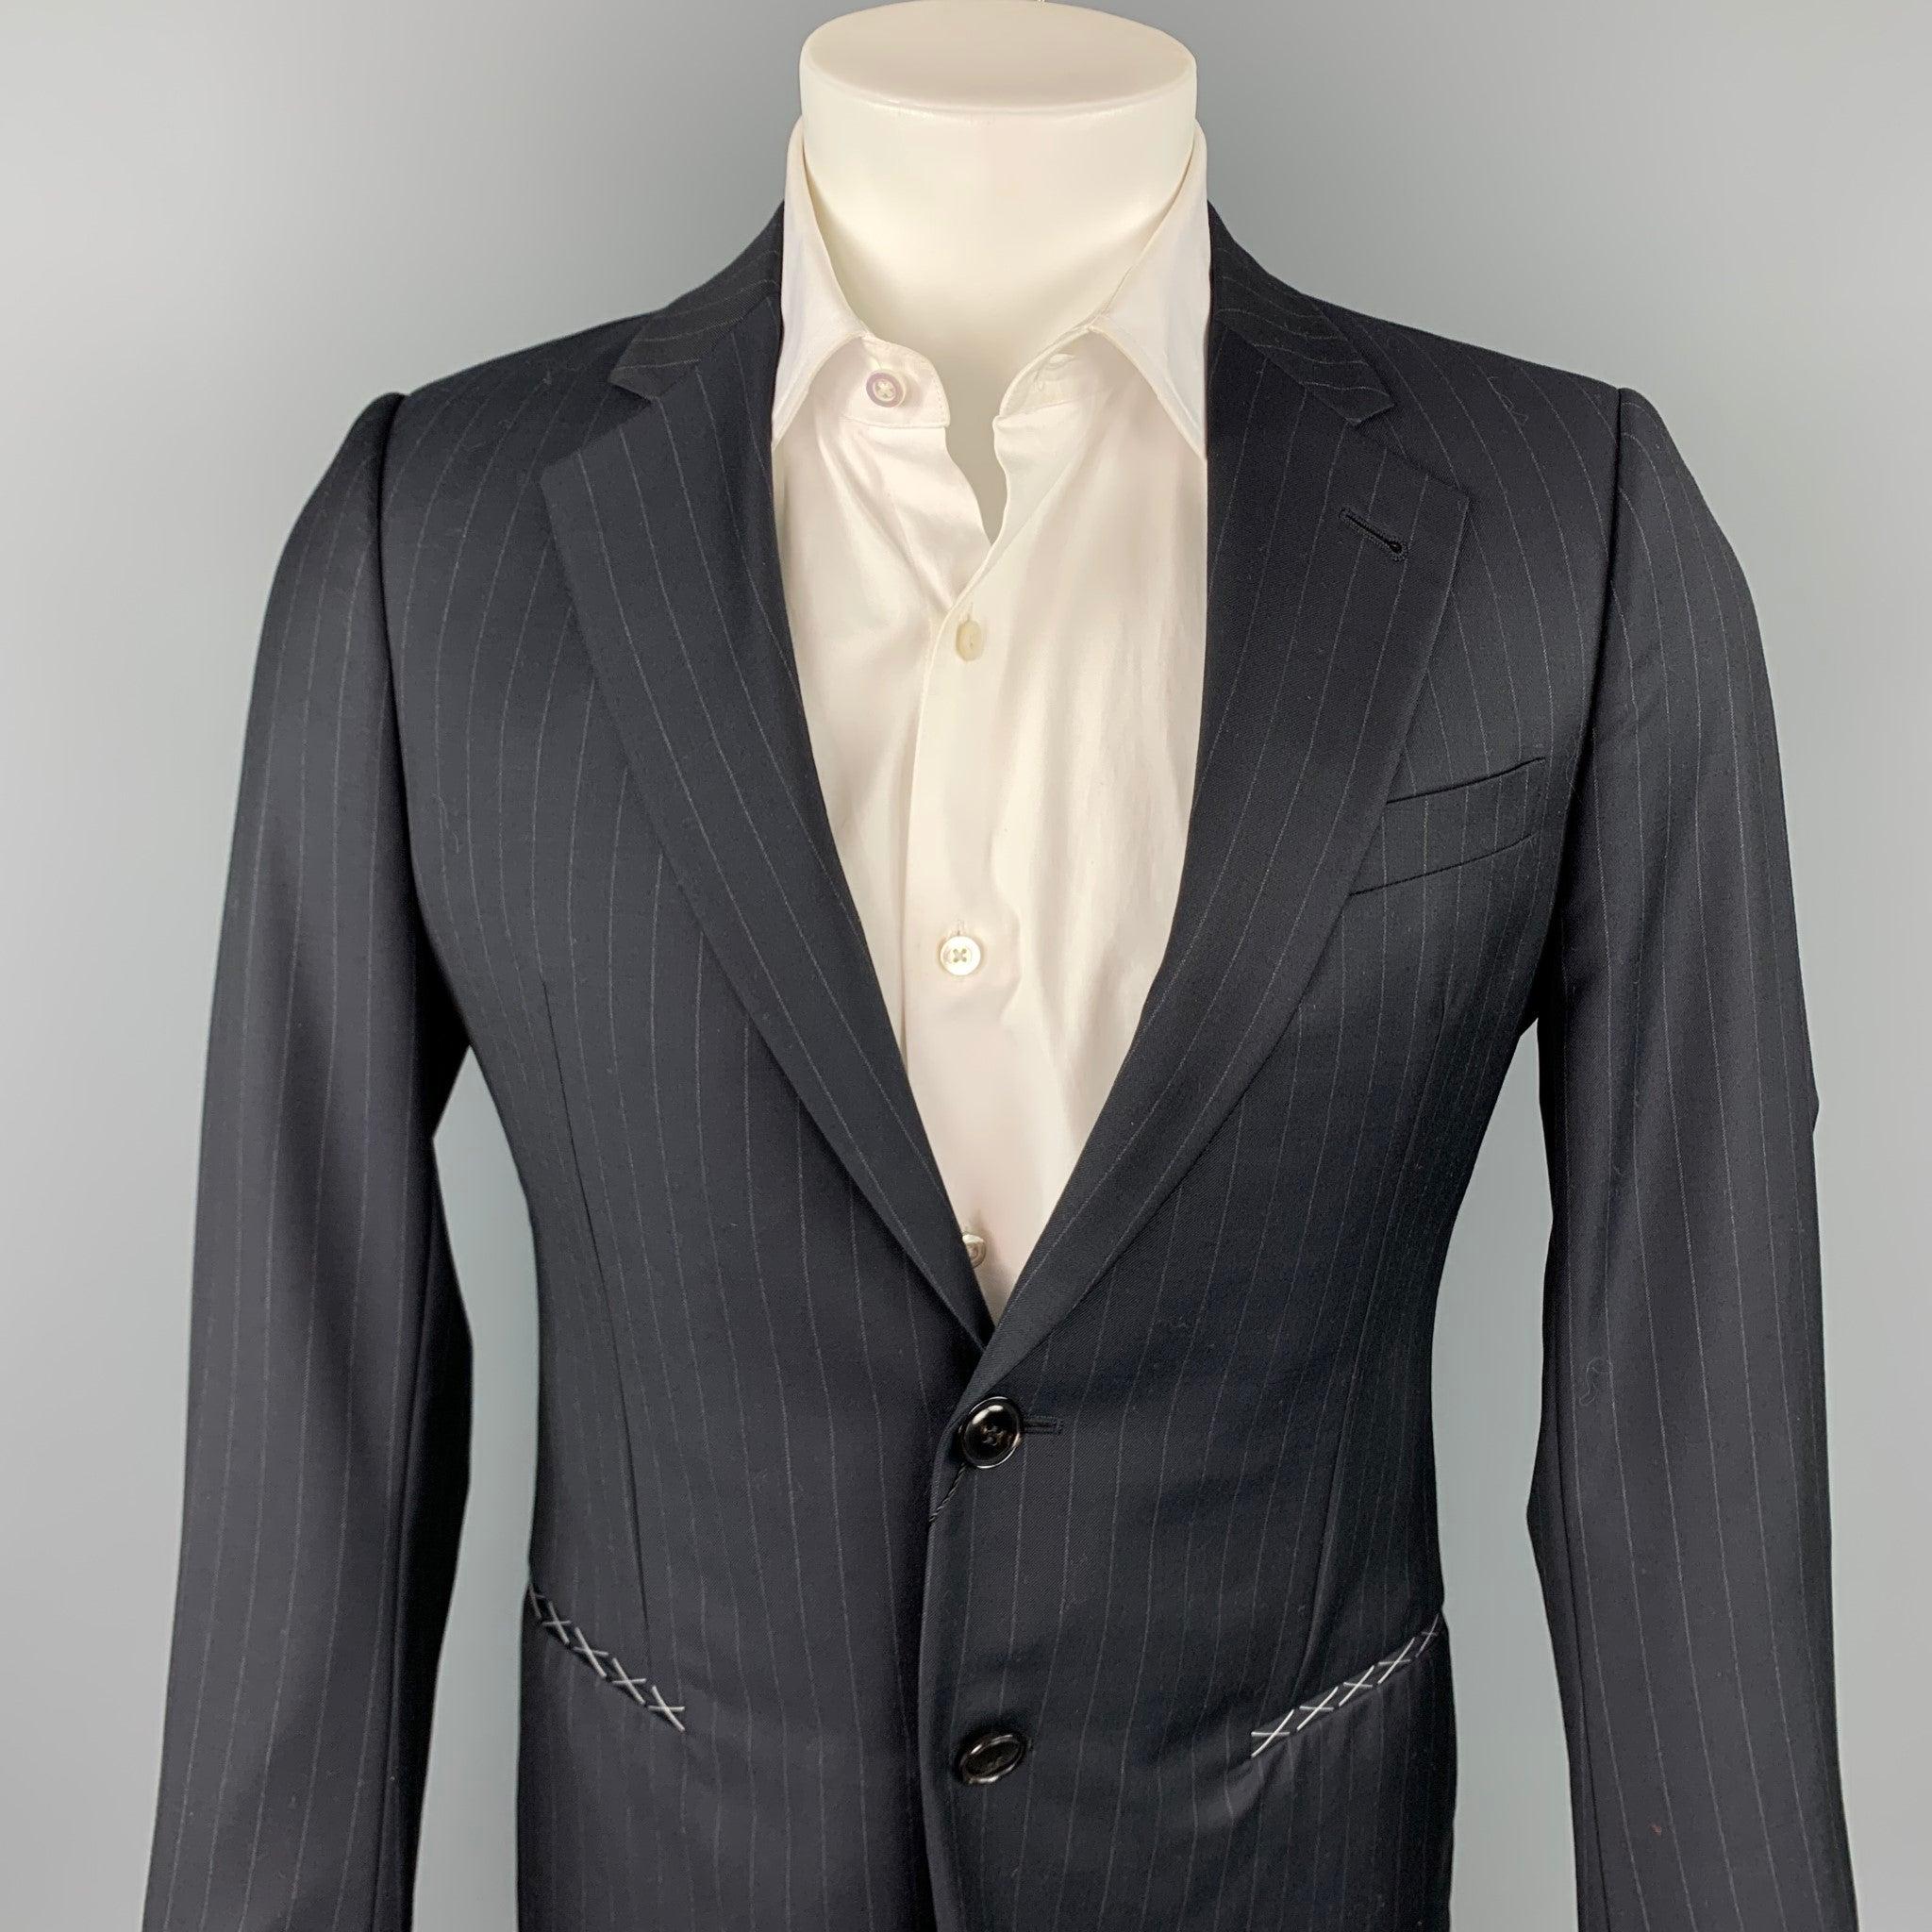 GIORGIO ARMANI sport coat comes in a navy chalk stripe wool with a full monogram print liner featuring a notch lapel, slit pockets, and a two button closure. Made in Italy.New With Tags.
 

Marked:   TG 46 

Measurements: 
 
Shoulder: 17 inches 